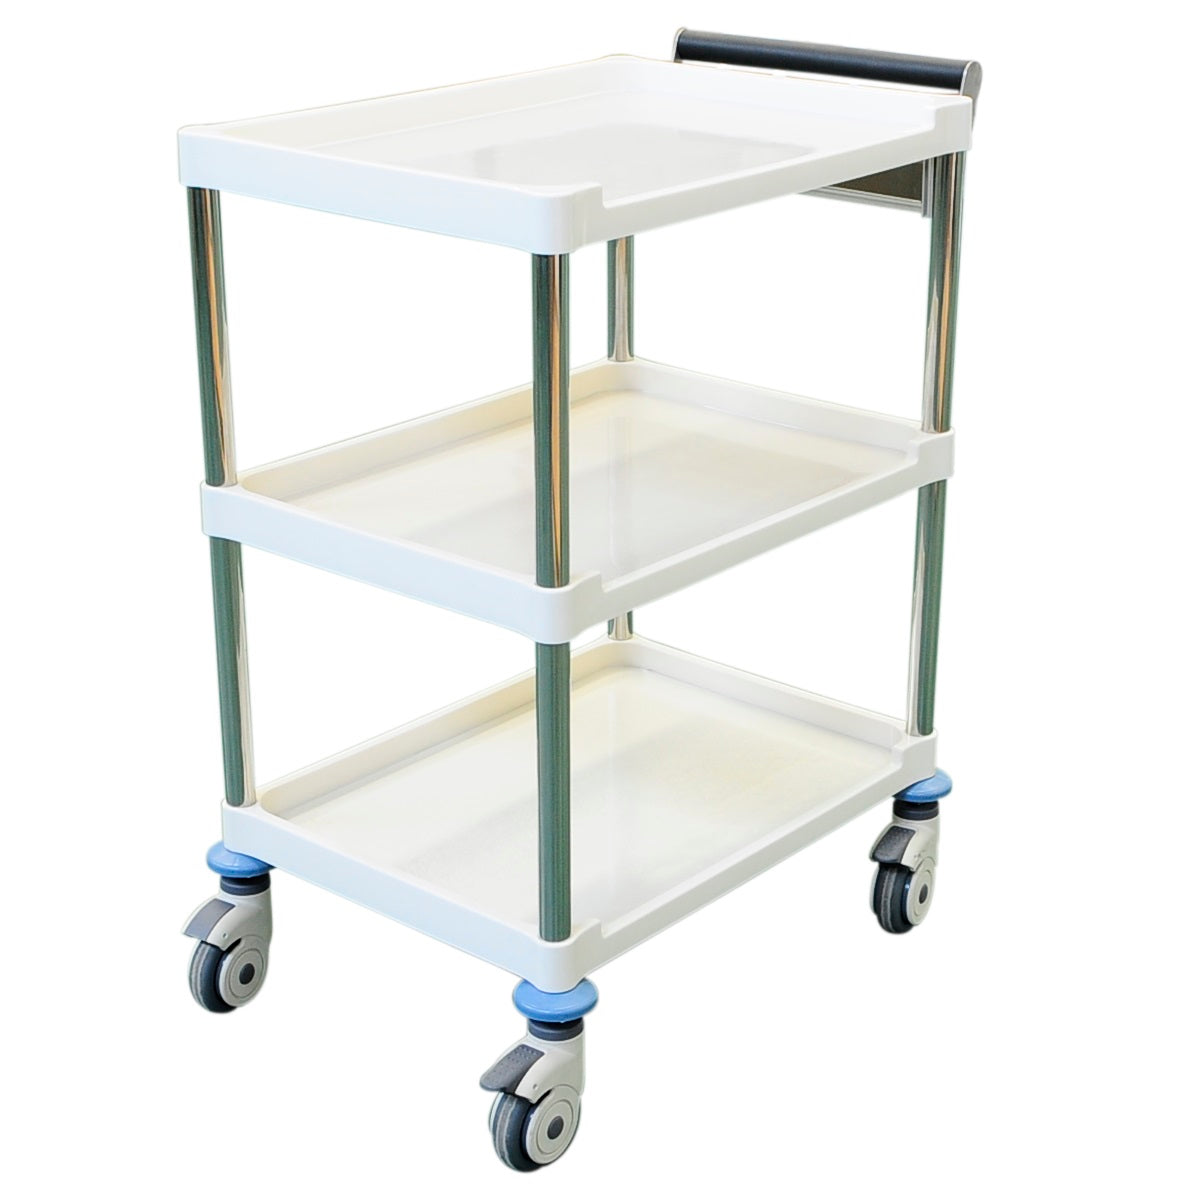 A strong ABS instrument trolley with one shelf for transport of goods throughout healthcare facilities.